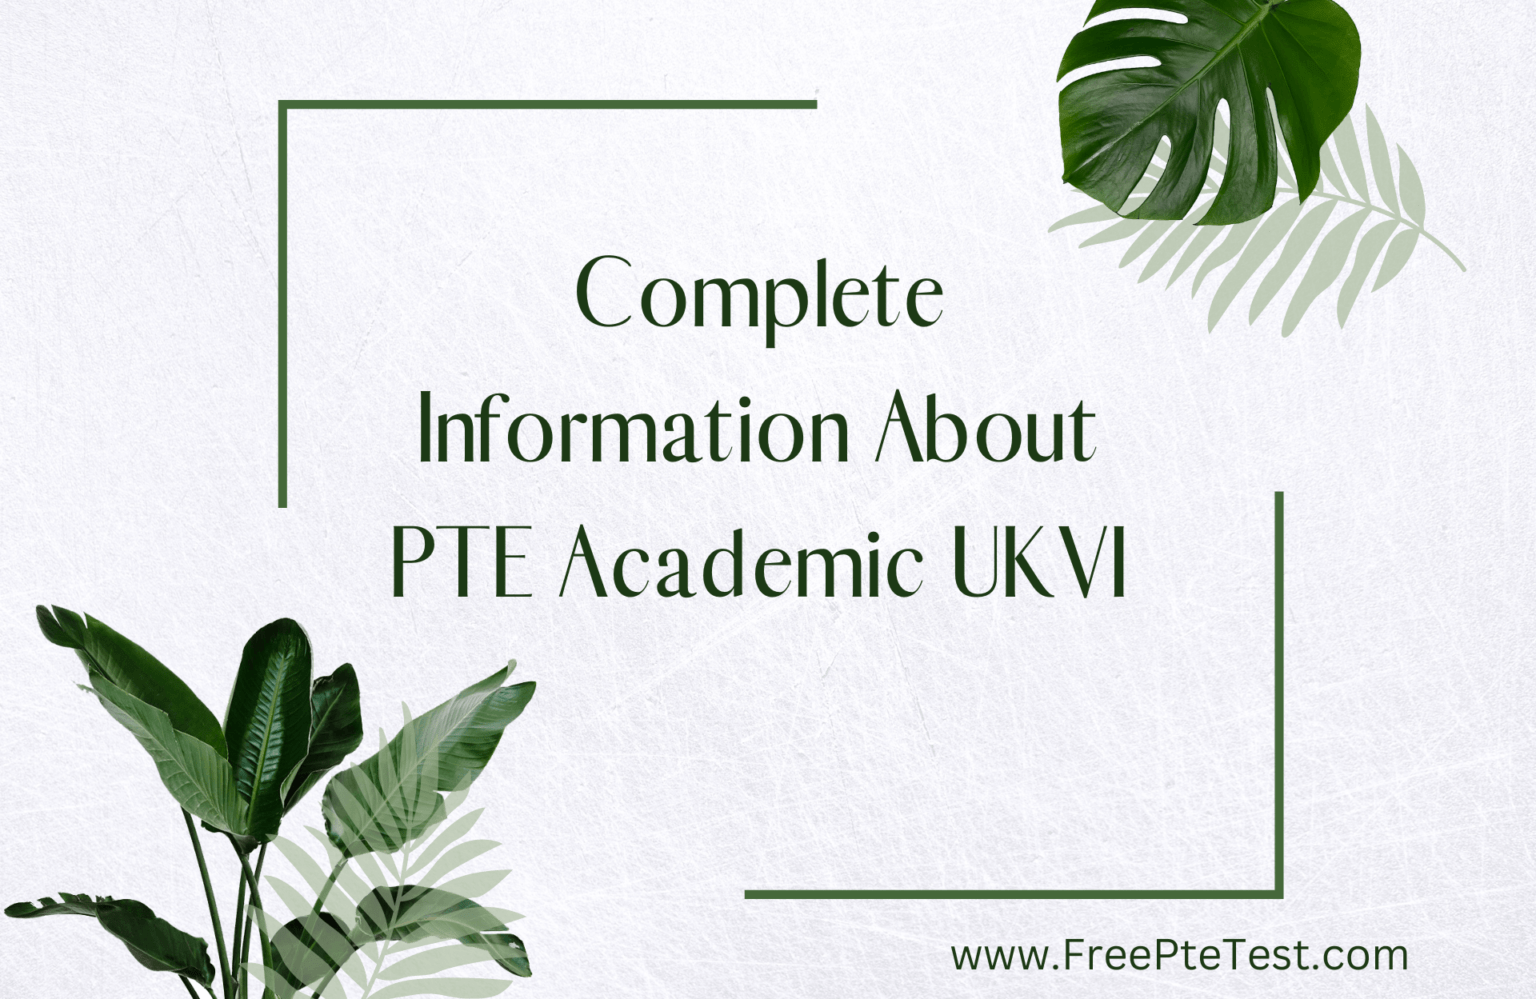 Complete Information about PTE Academic UKVI